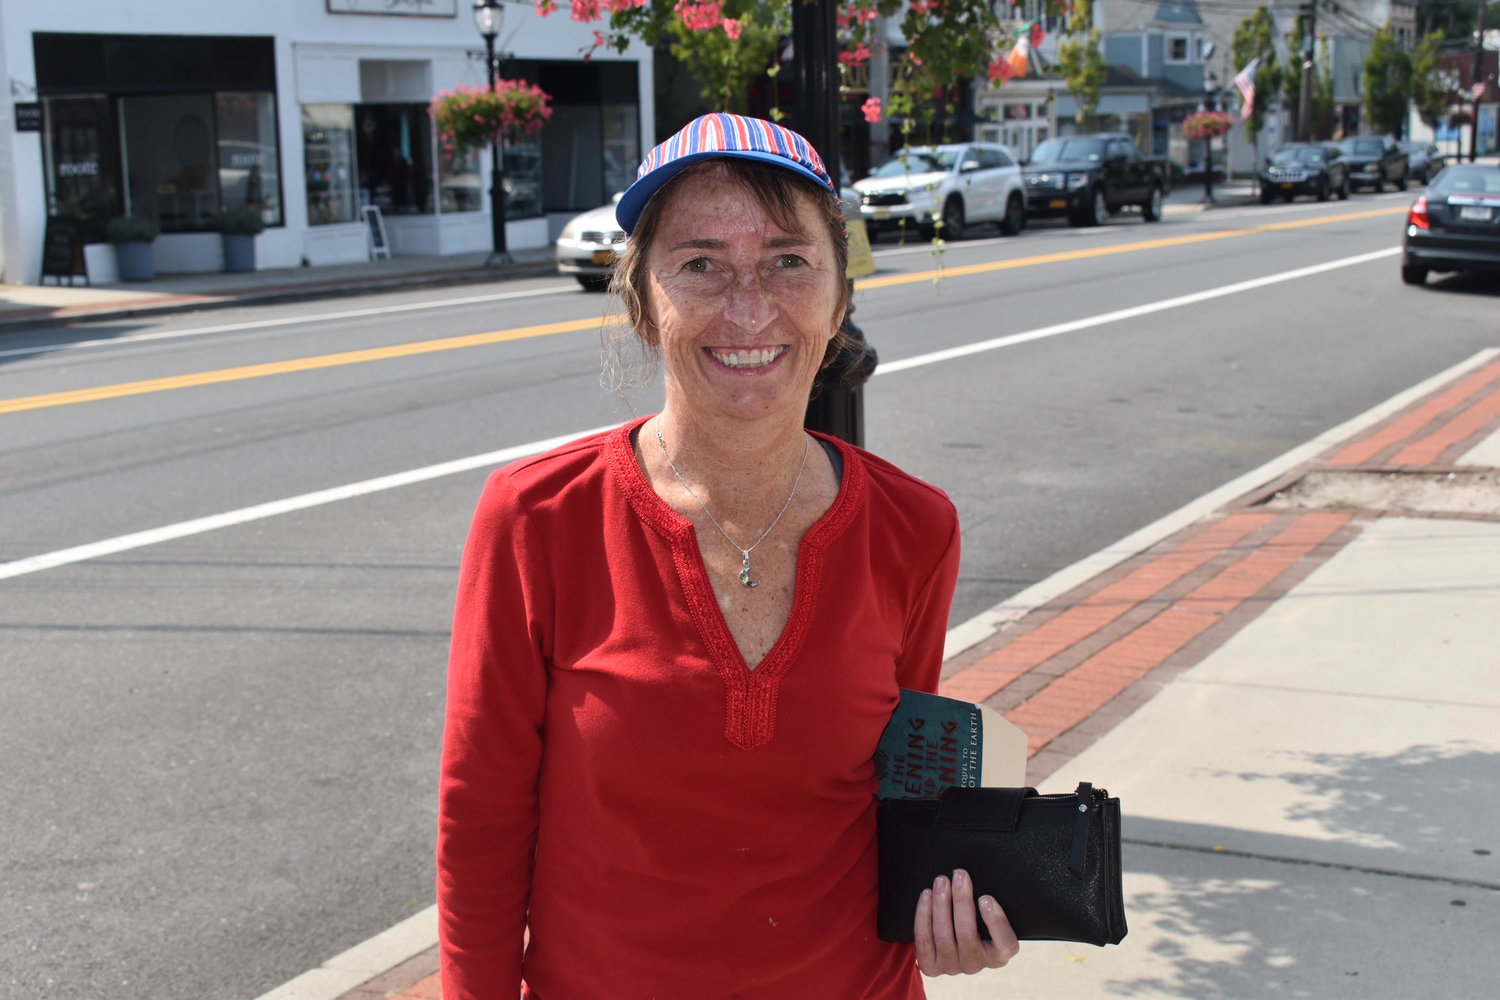 Center Moriches, Main Street
Name: Diane Kenna 
Favorite fall activity: “I love the Halloween Walk at Camp Pa-Qua-Tuck because everyone dresses up in costumes and they jump out at you from behind trees. It’s a lot of fun.”